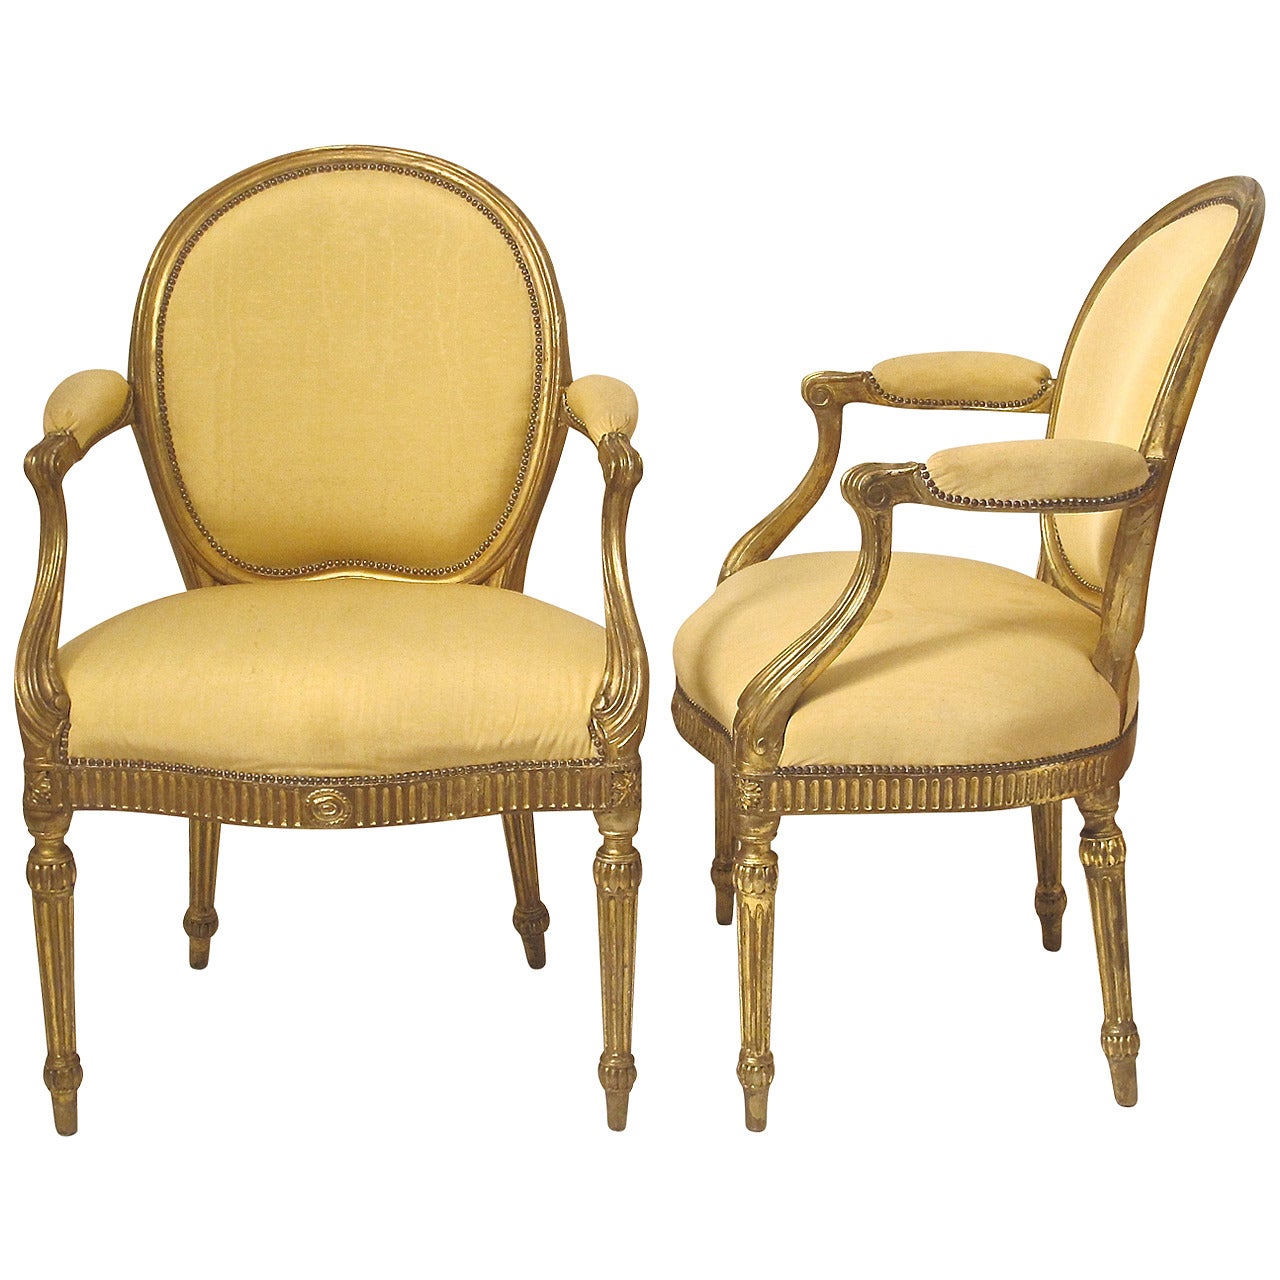 Pair of George III Giltwood Armchairs, Possibly by John Linnell